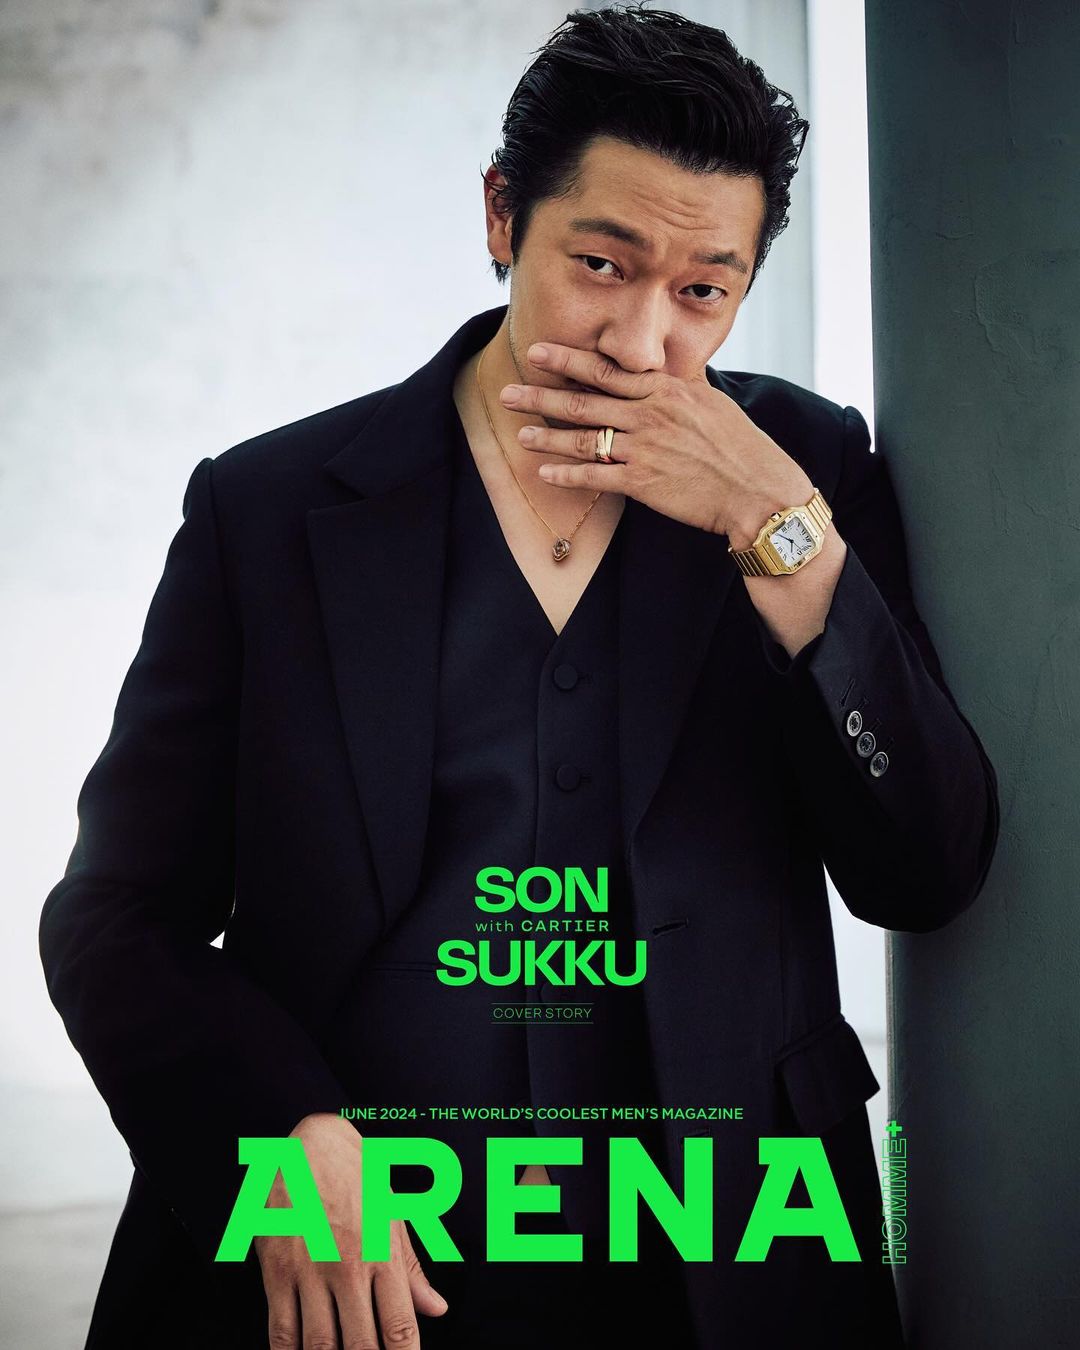 Son Suk Ku Talks About Film Production, Wanting To Be A Positive Influence, And More